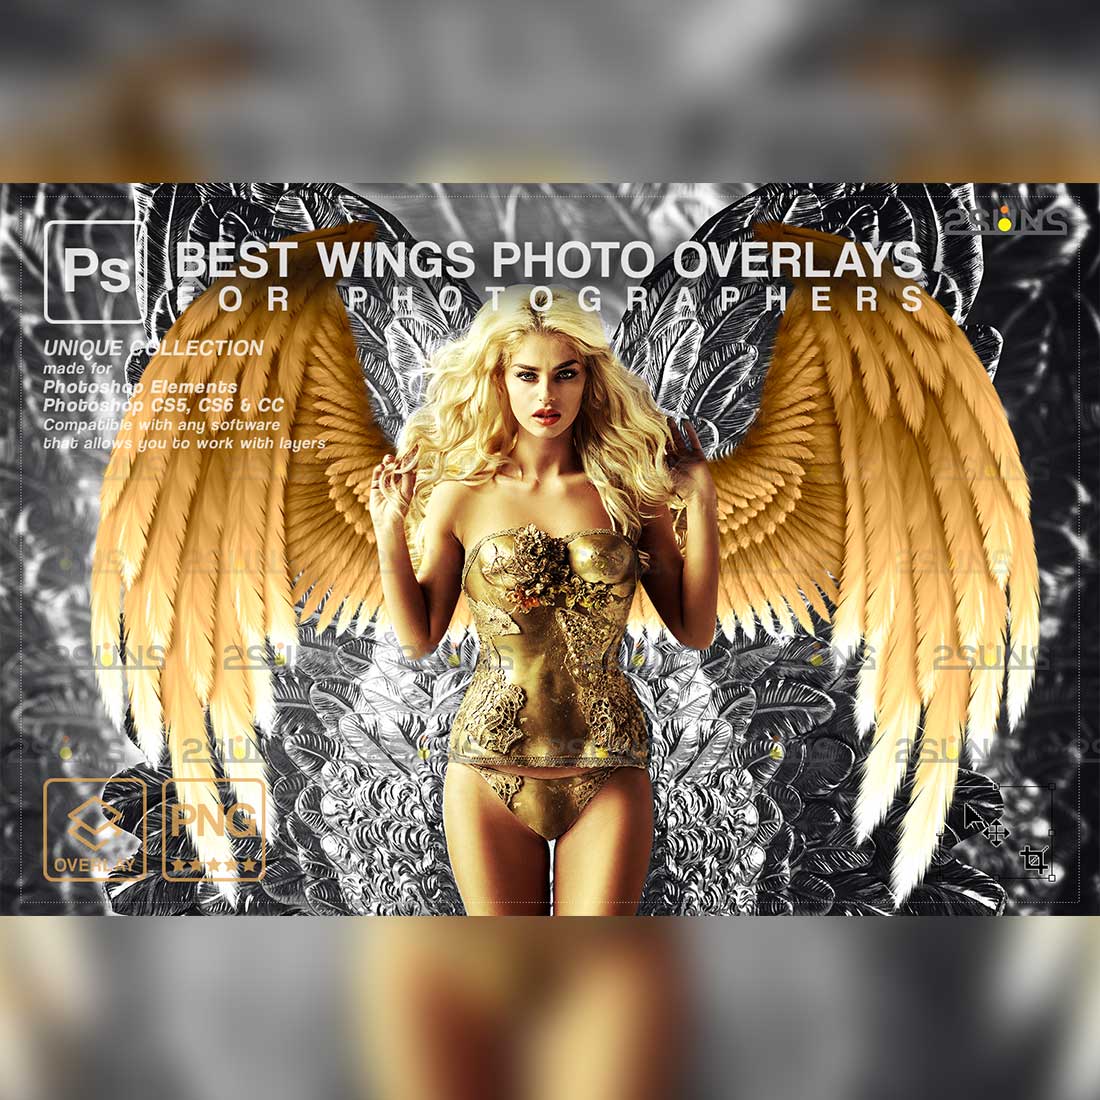 Realistic Black White Gold Angel Wings Photoshop Overlays Cover image.